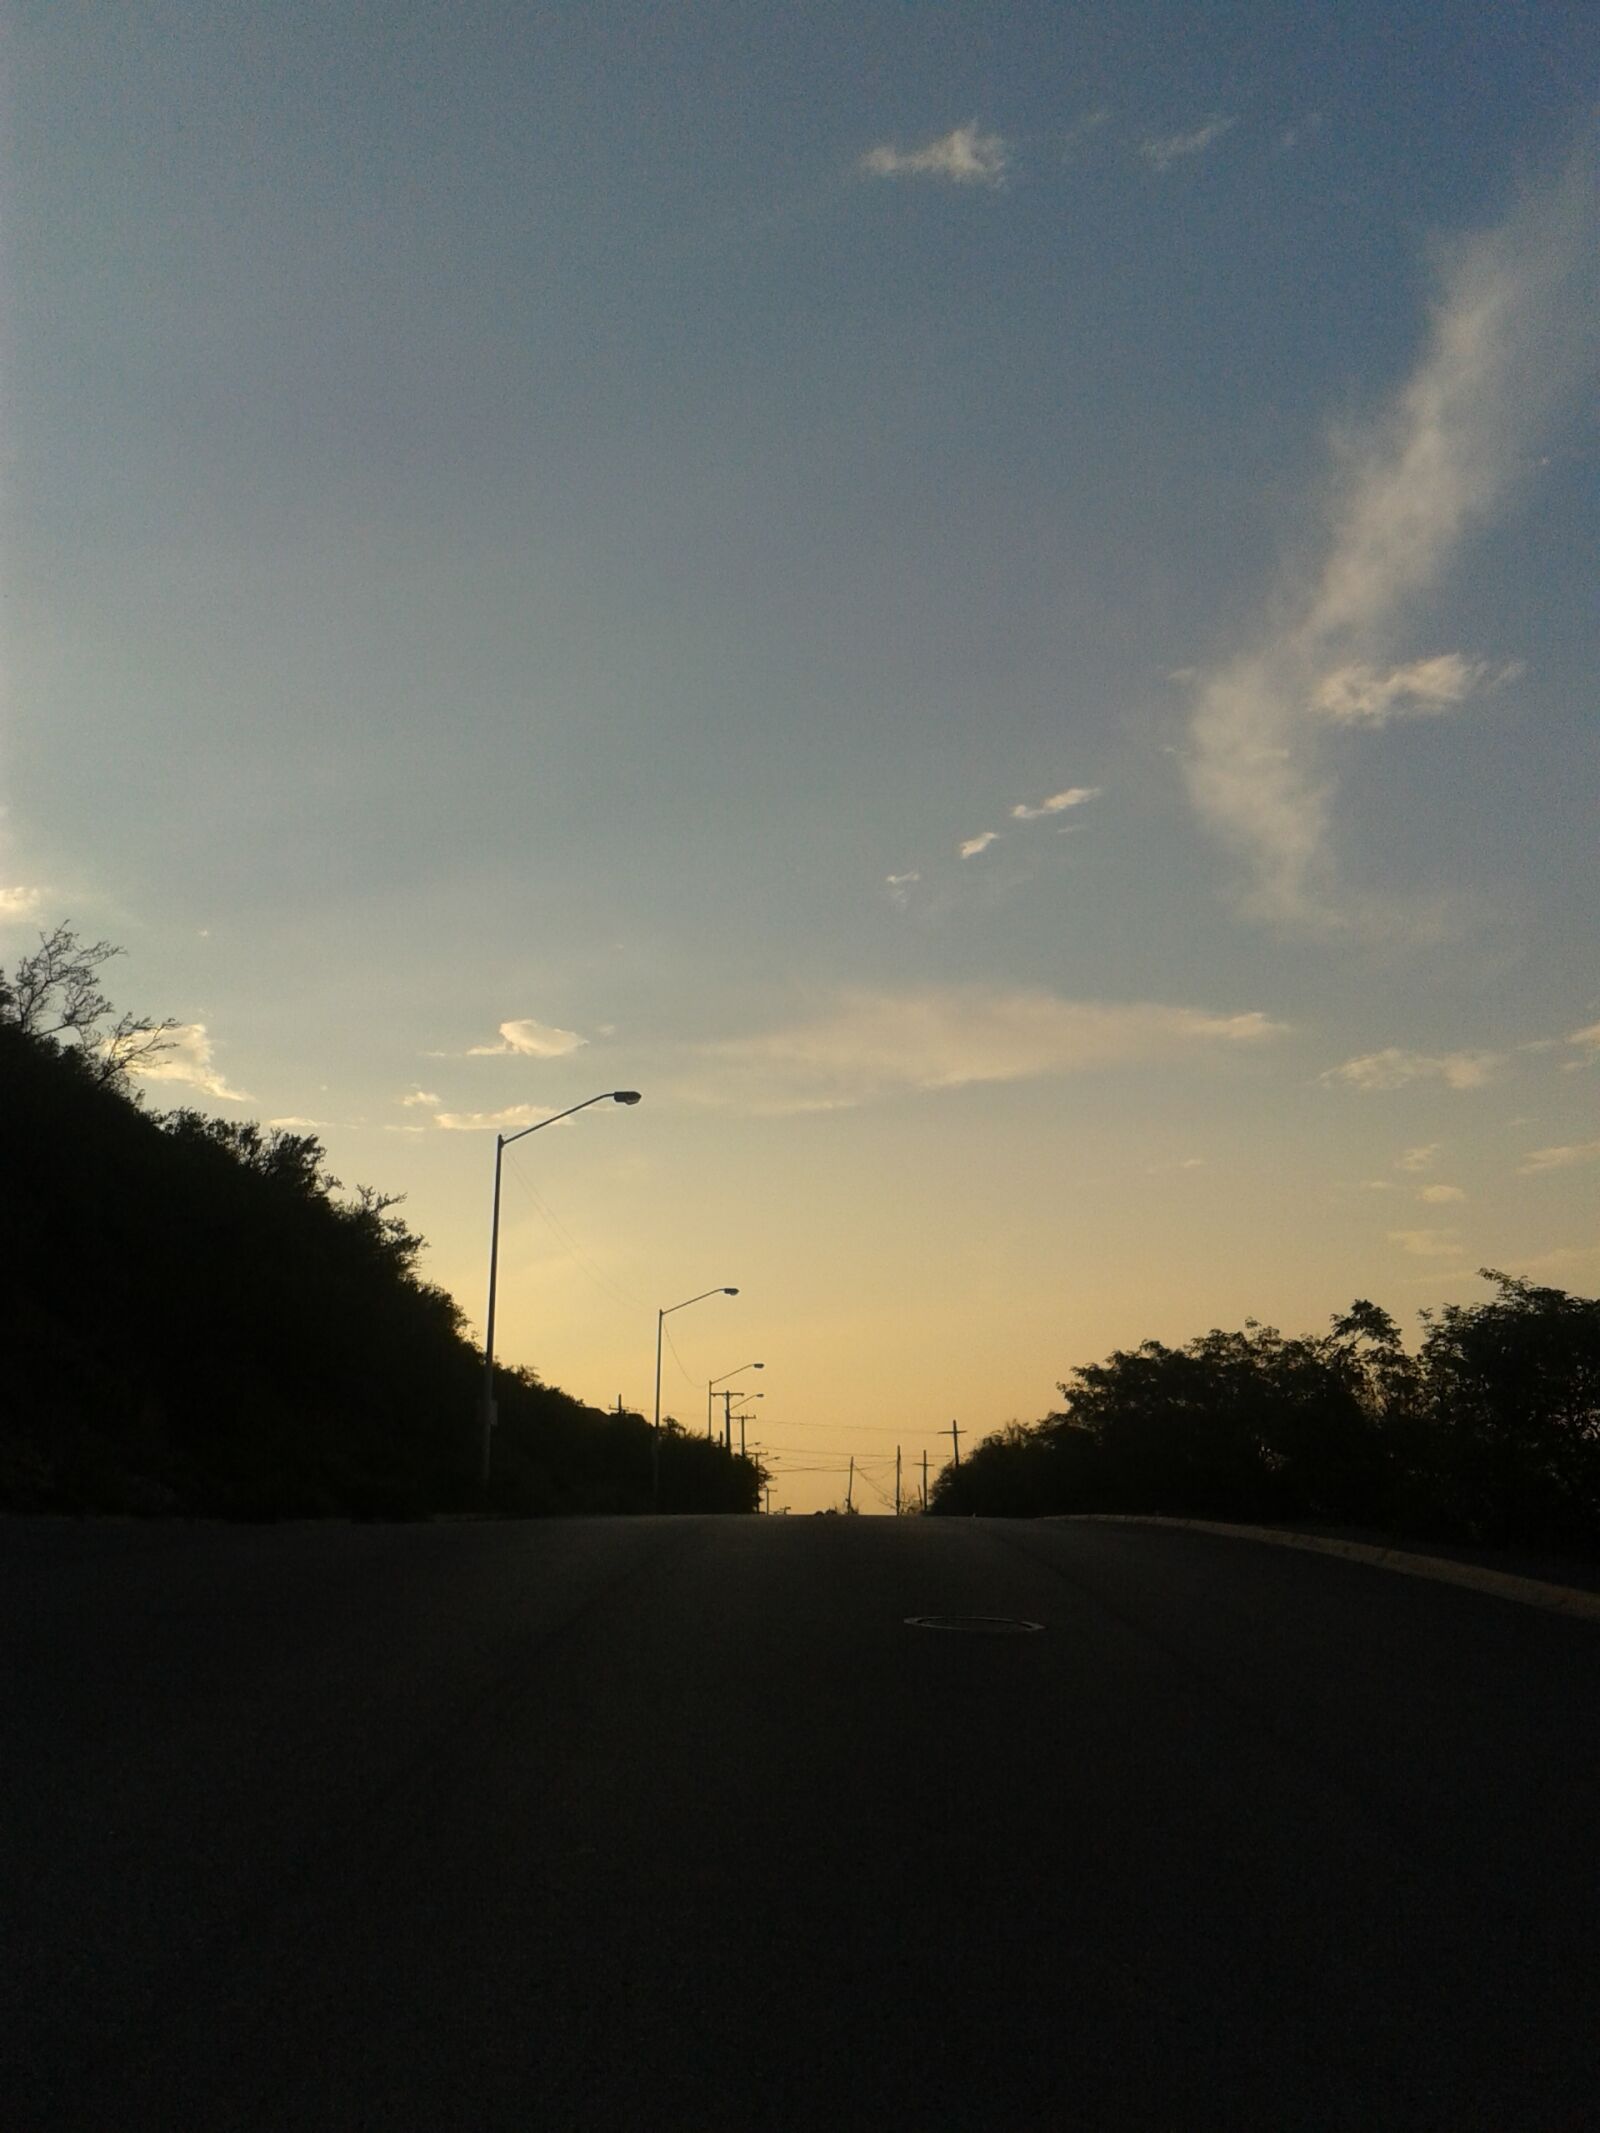 Samsung Galaxy S3 Mini sample photo. Colorful, highway, landscape, sky photography